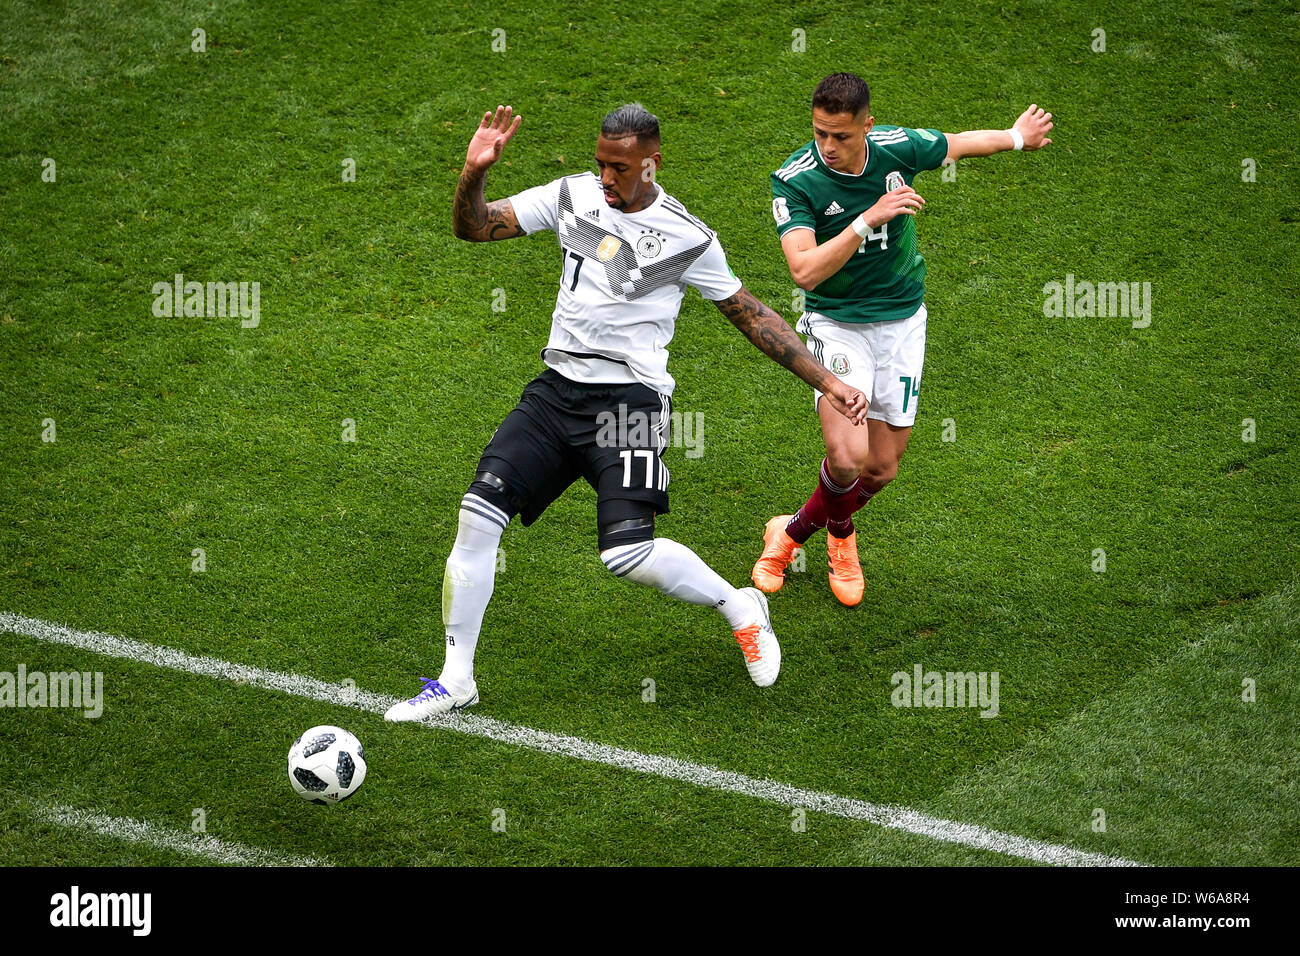 Javier Hernandez of Mexico, right, challenges Jerome Boateng of Germany in their Group F match during the 2018 FIFA World Cup in Moscow, Russia, 17 Ju Stock Photo